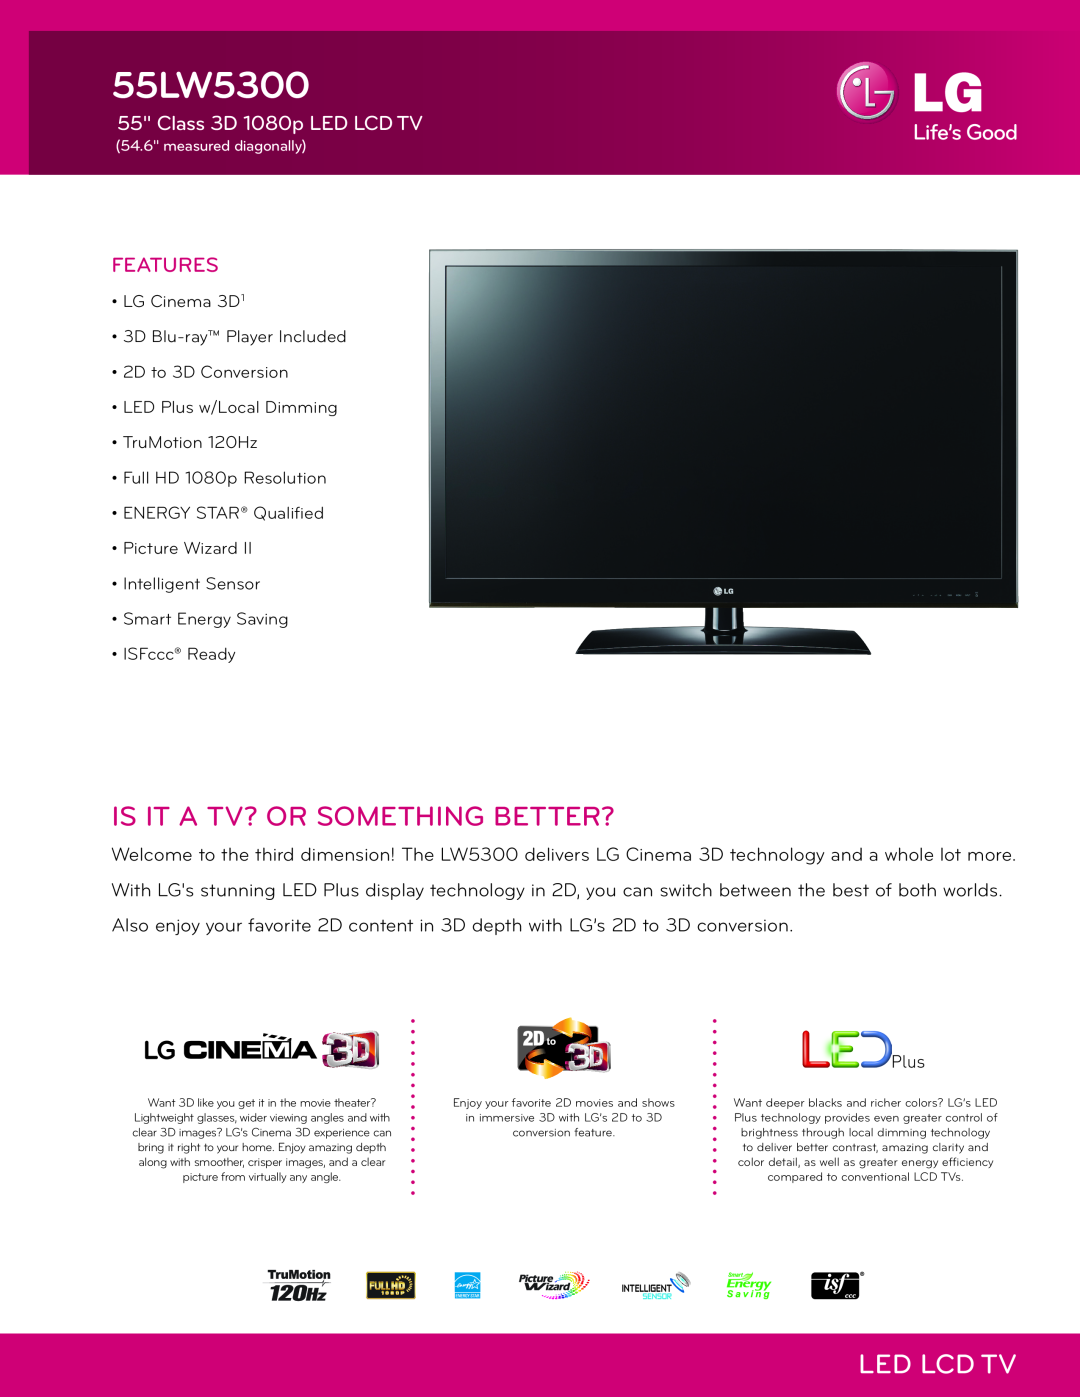 LG Electronics 55LW5300 manual Features, Is It A Tv? Or Something Better?, Led Lcd Tv, Class 3D 1080p LED LCD TV 